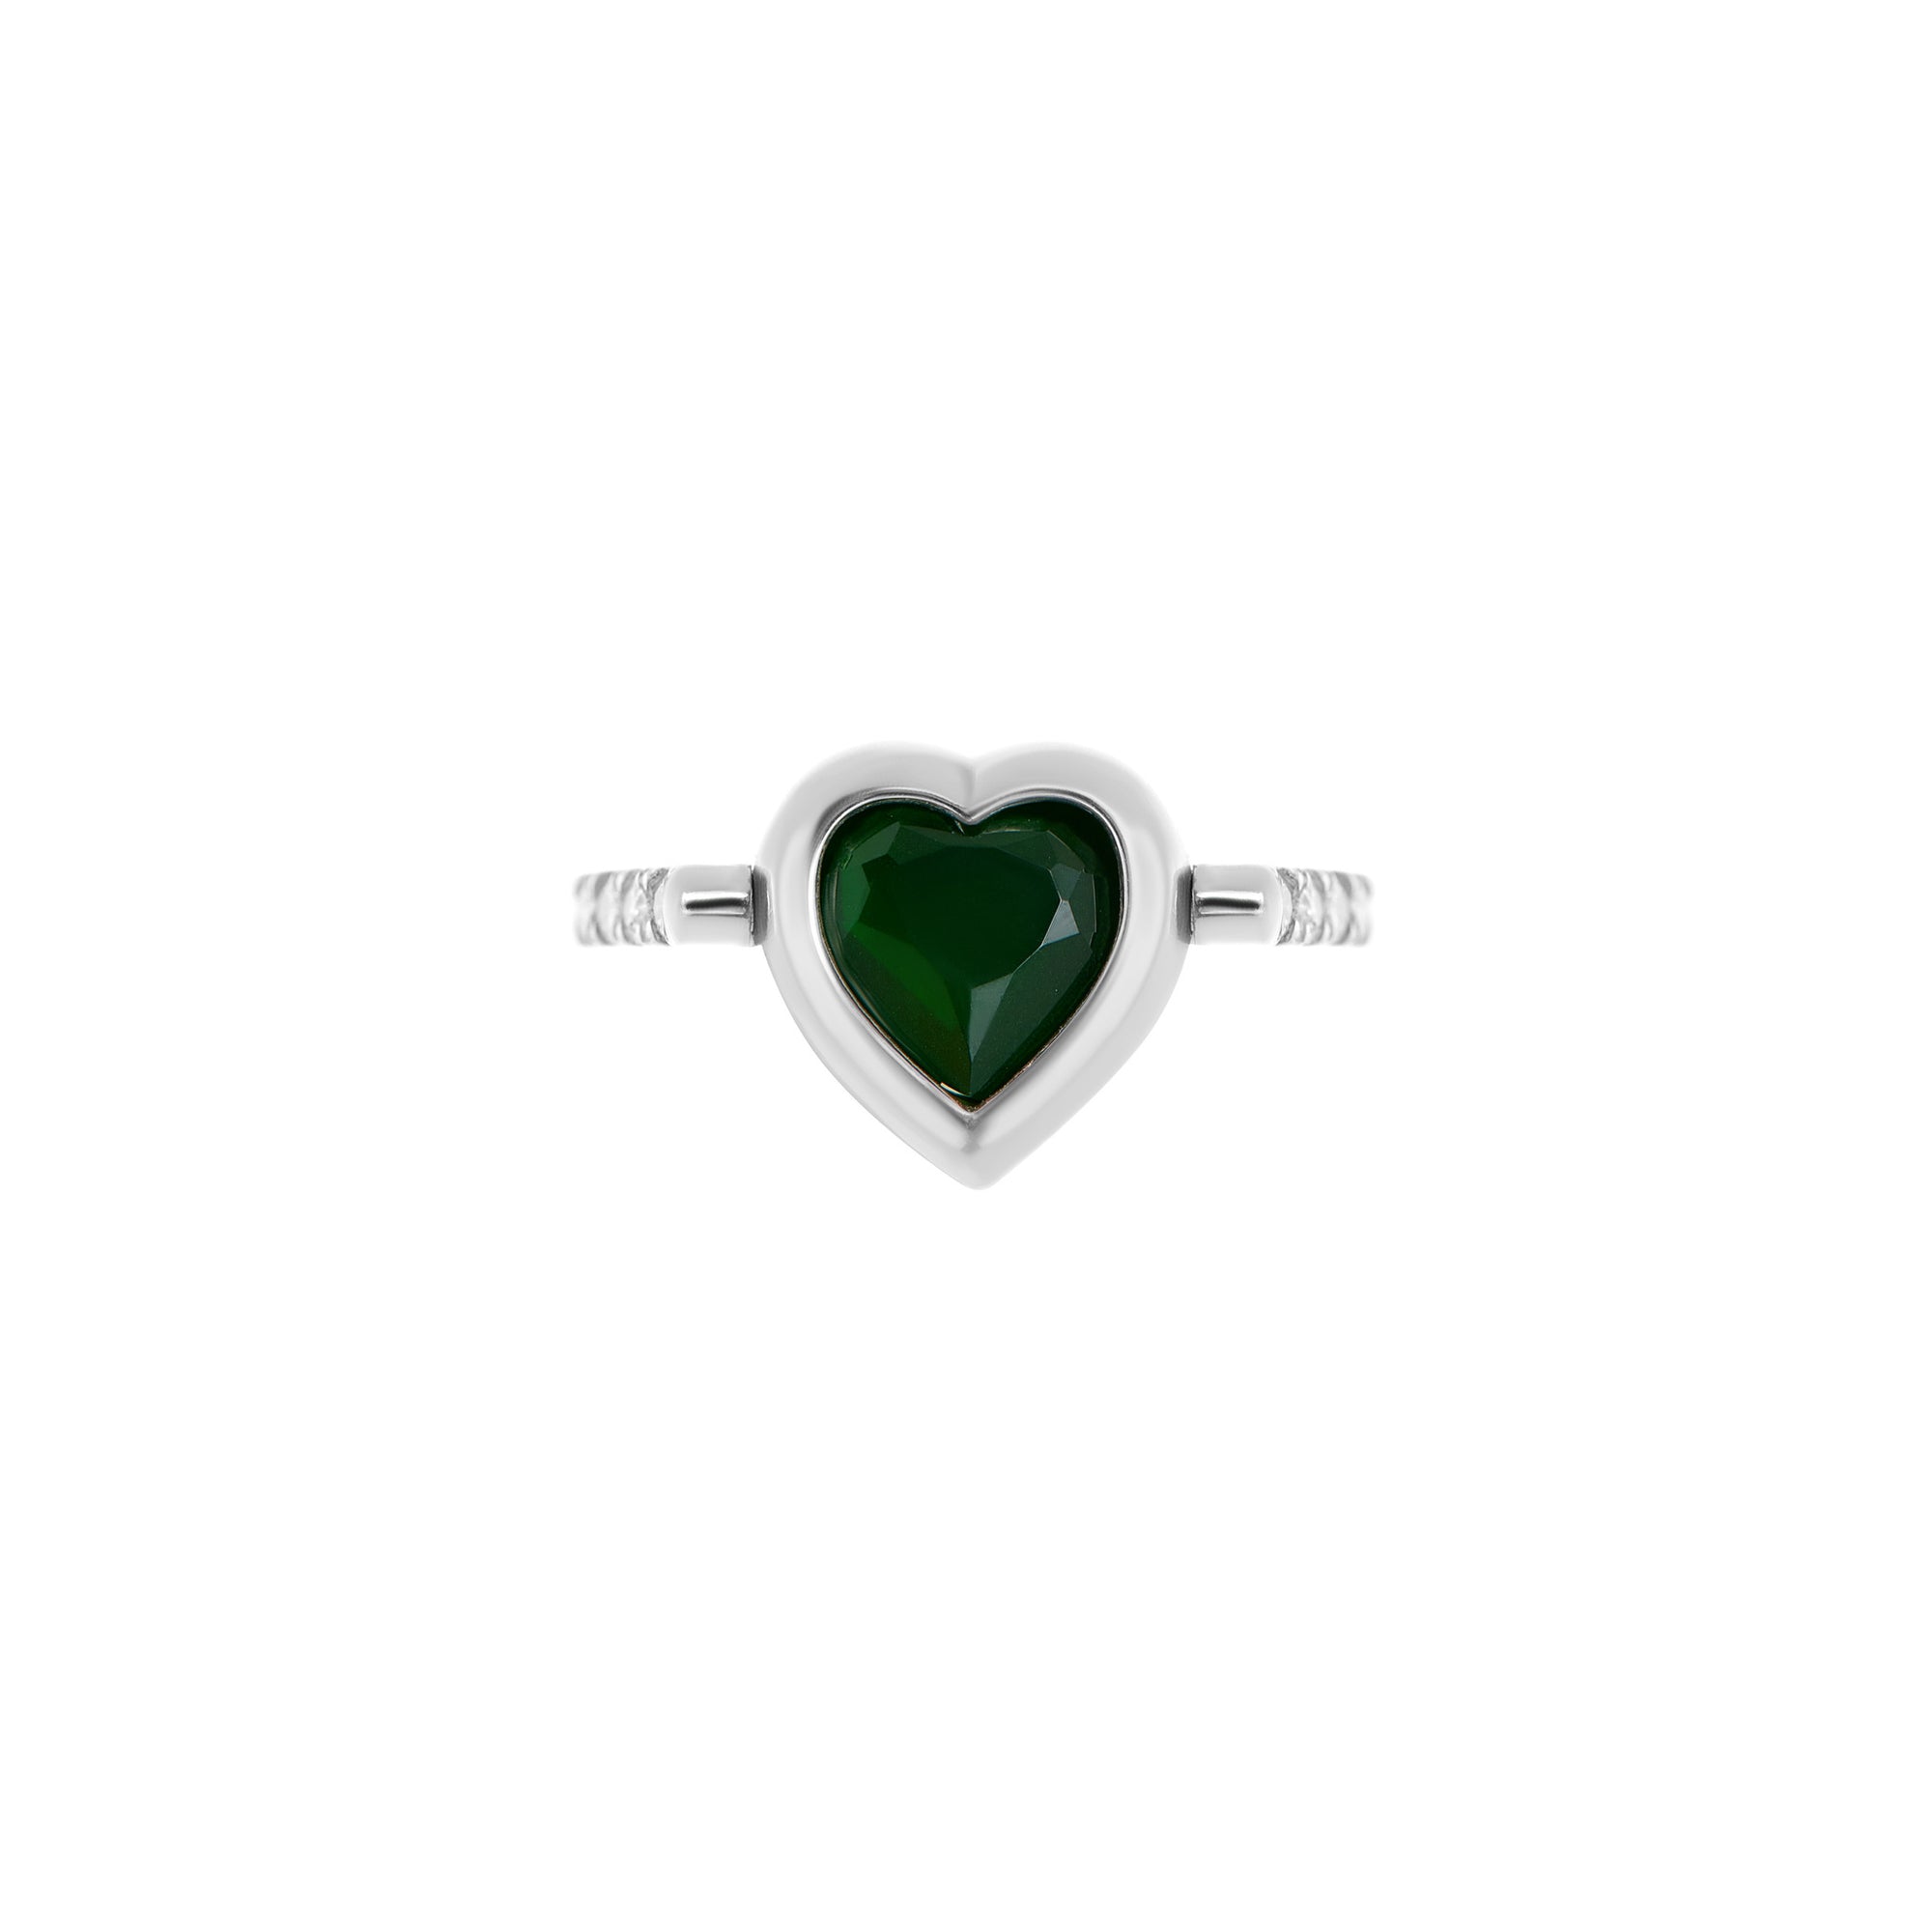 Ring 'Dark Green Eddy Heart' – Be Gentle With Yourself